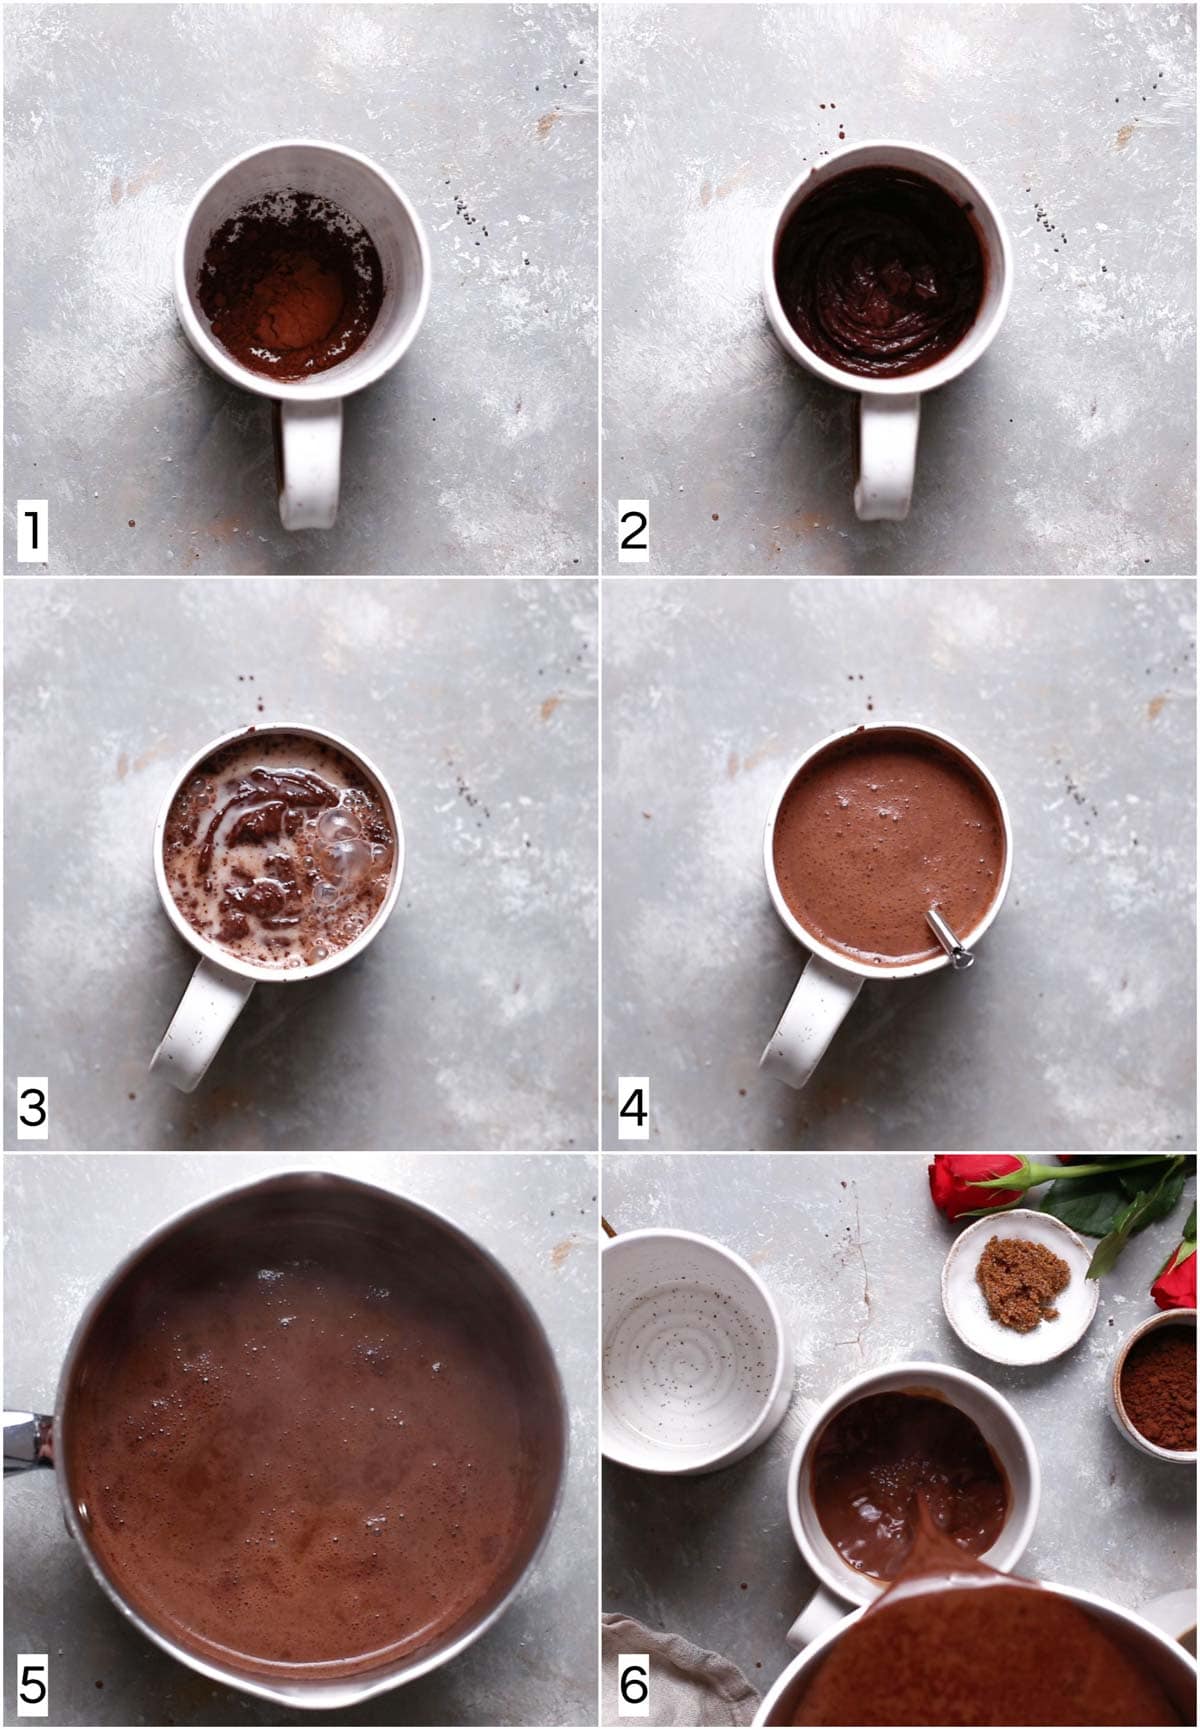 A collage of six images showing all the different steps in making hot cocoa.